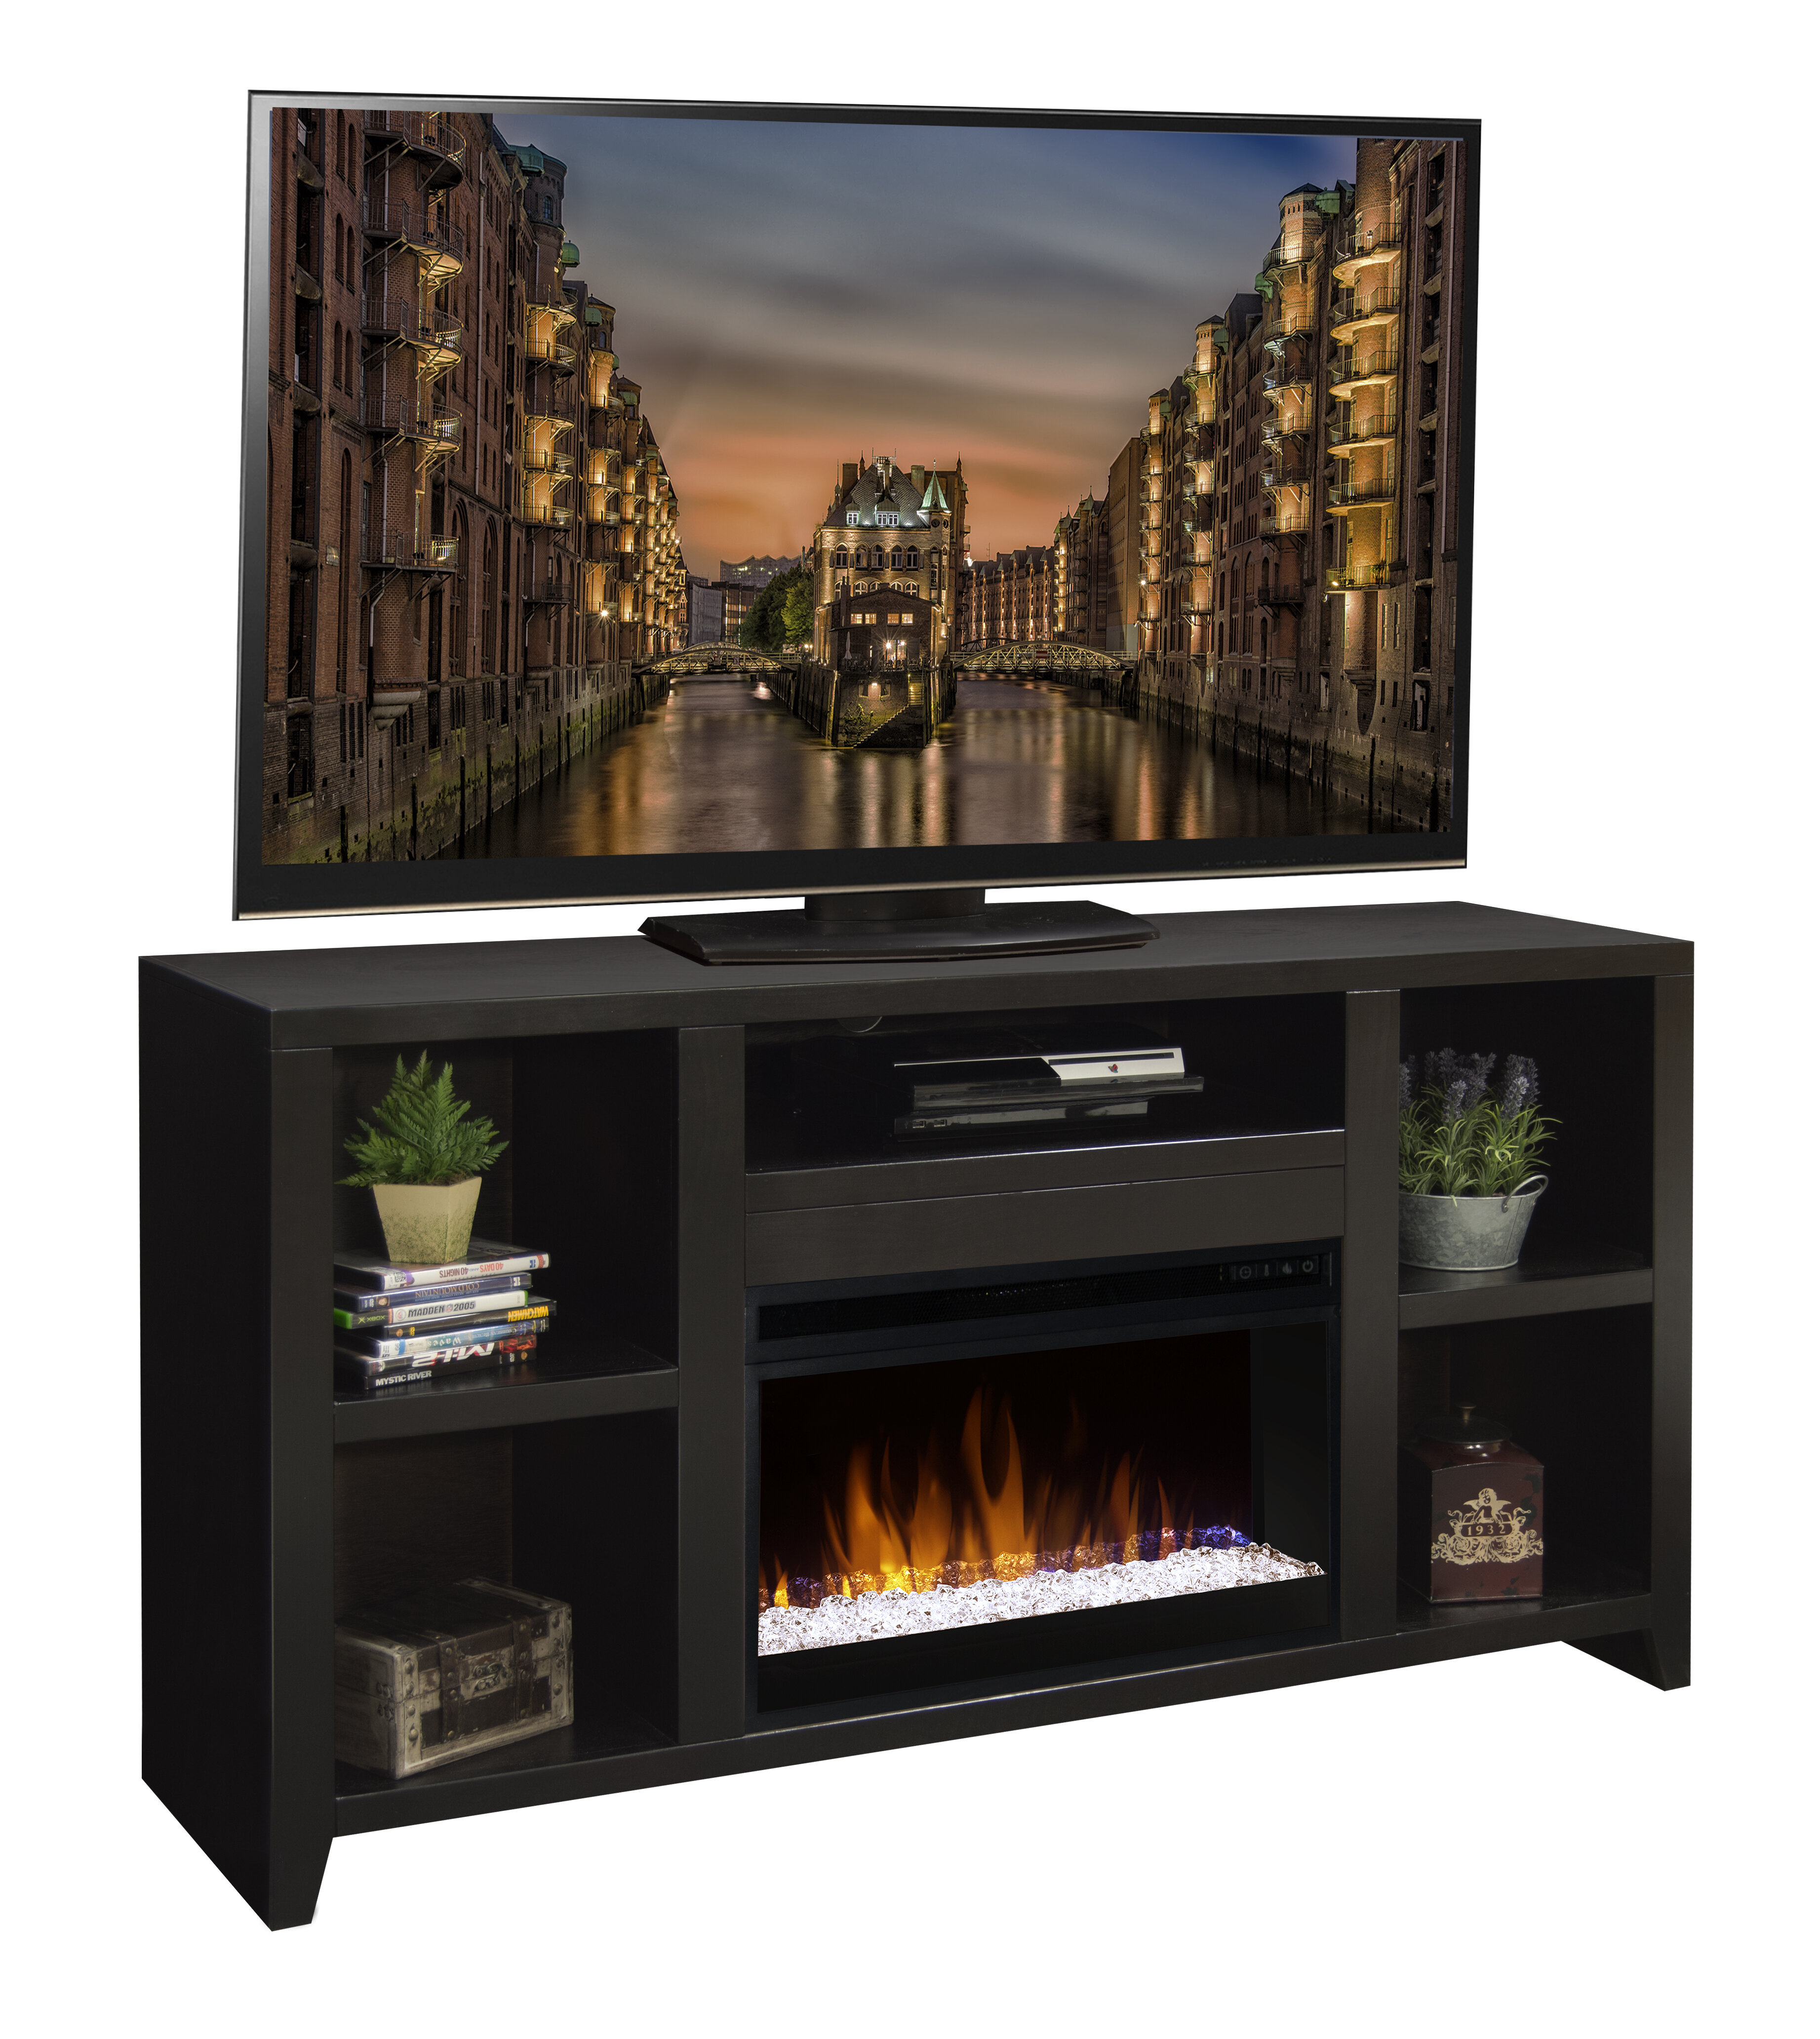 Fireplace Tv Stand for 55 Inch Tv Awesome Darby Home Co Garretson Tv Stand for Tvs Up to 65" with